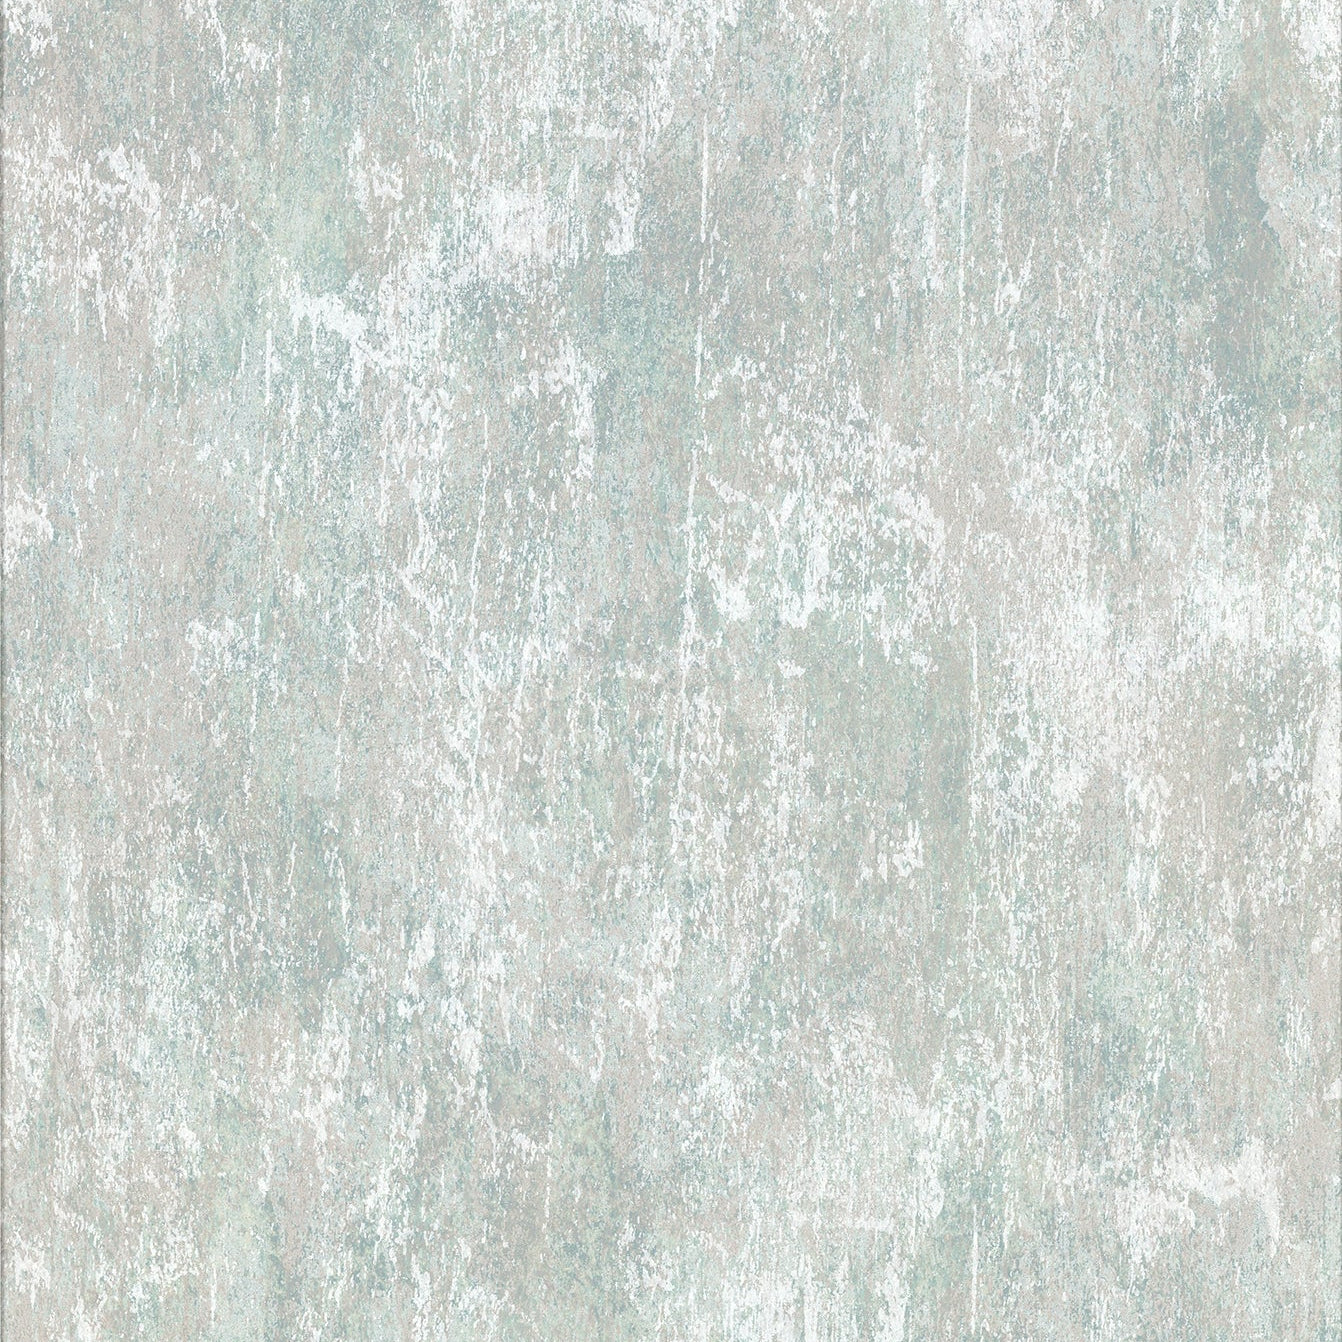 Acquire 2959-AWDWP0076-02 Textural Essentials Micah Teal Distressed Texture Teal Brewster Wallpaper